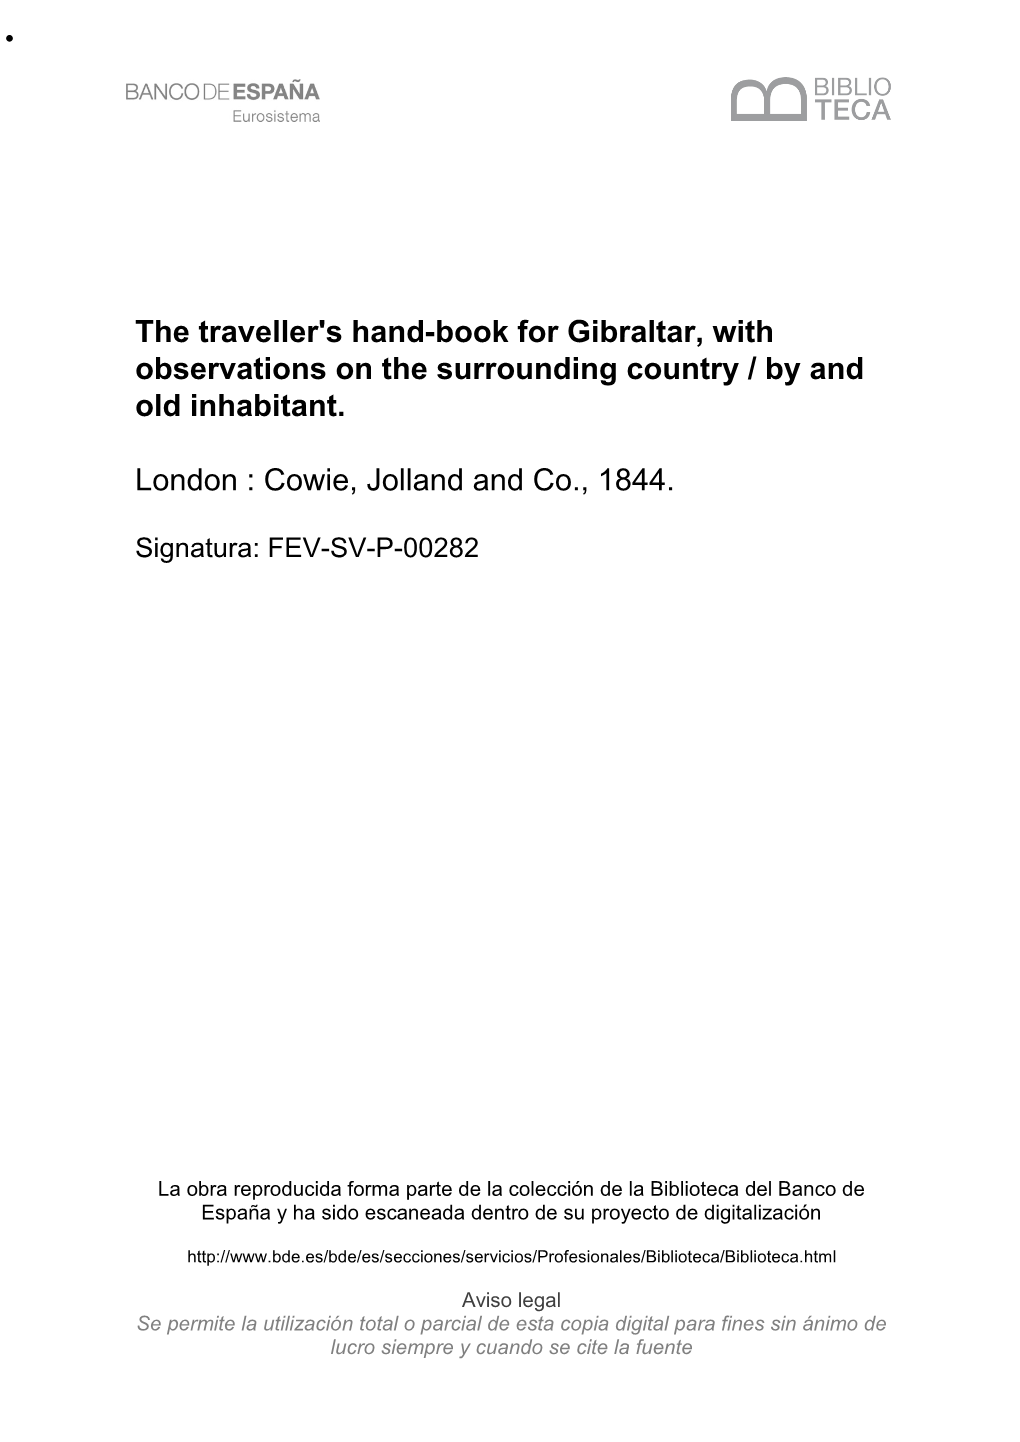 The Traveller's Hand-Book for Gibraltar, with Observations on the Surrounding Country / by and Old Inhabitant. London